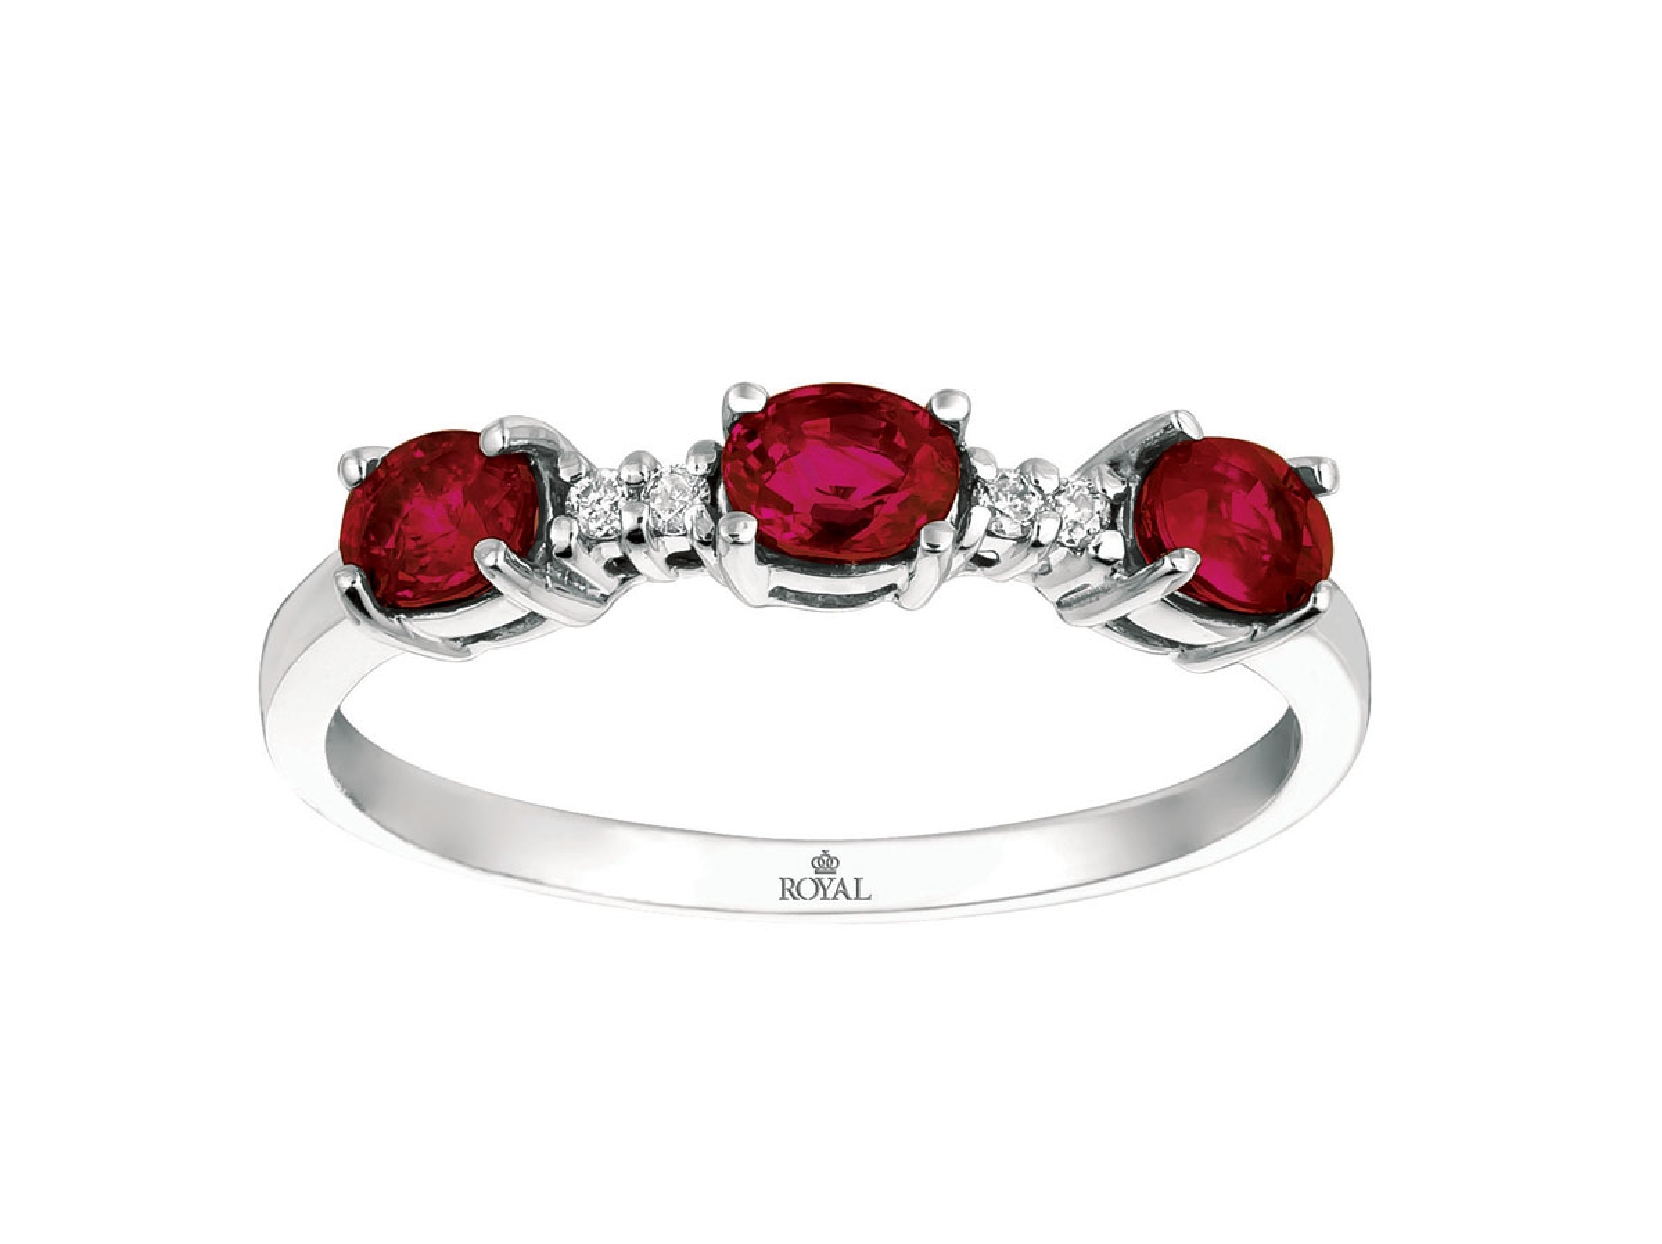 14K White Gold Tri-Ruby Stackable Band with Diamond Accents 
Size 6.5 .06 CT Diamonds .60 CT Rubies

W3820RB